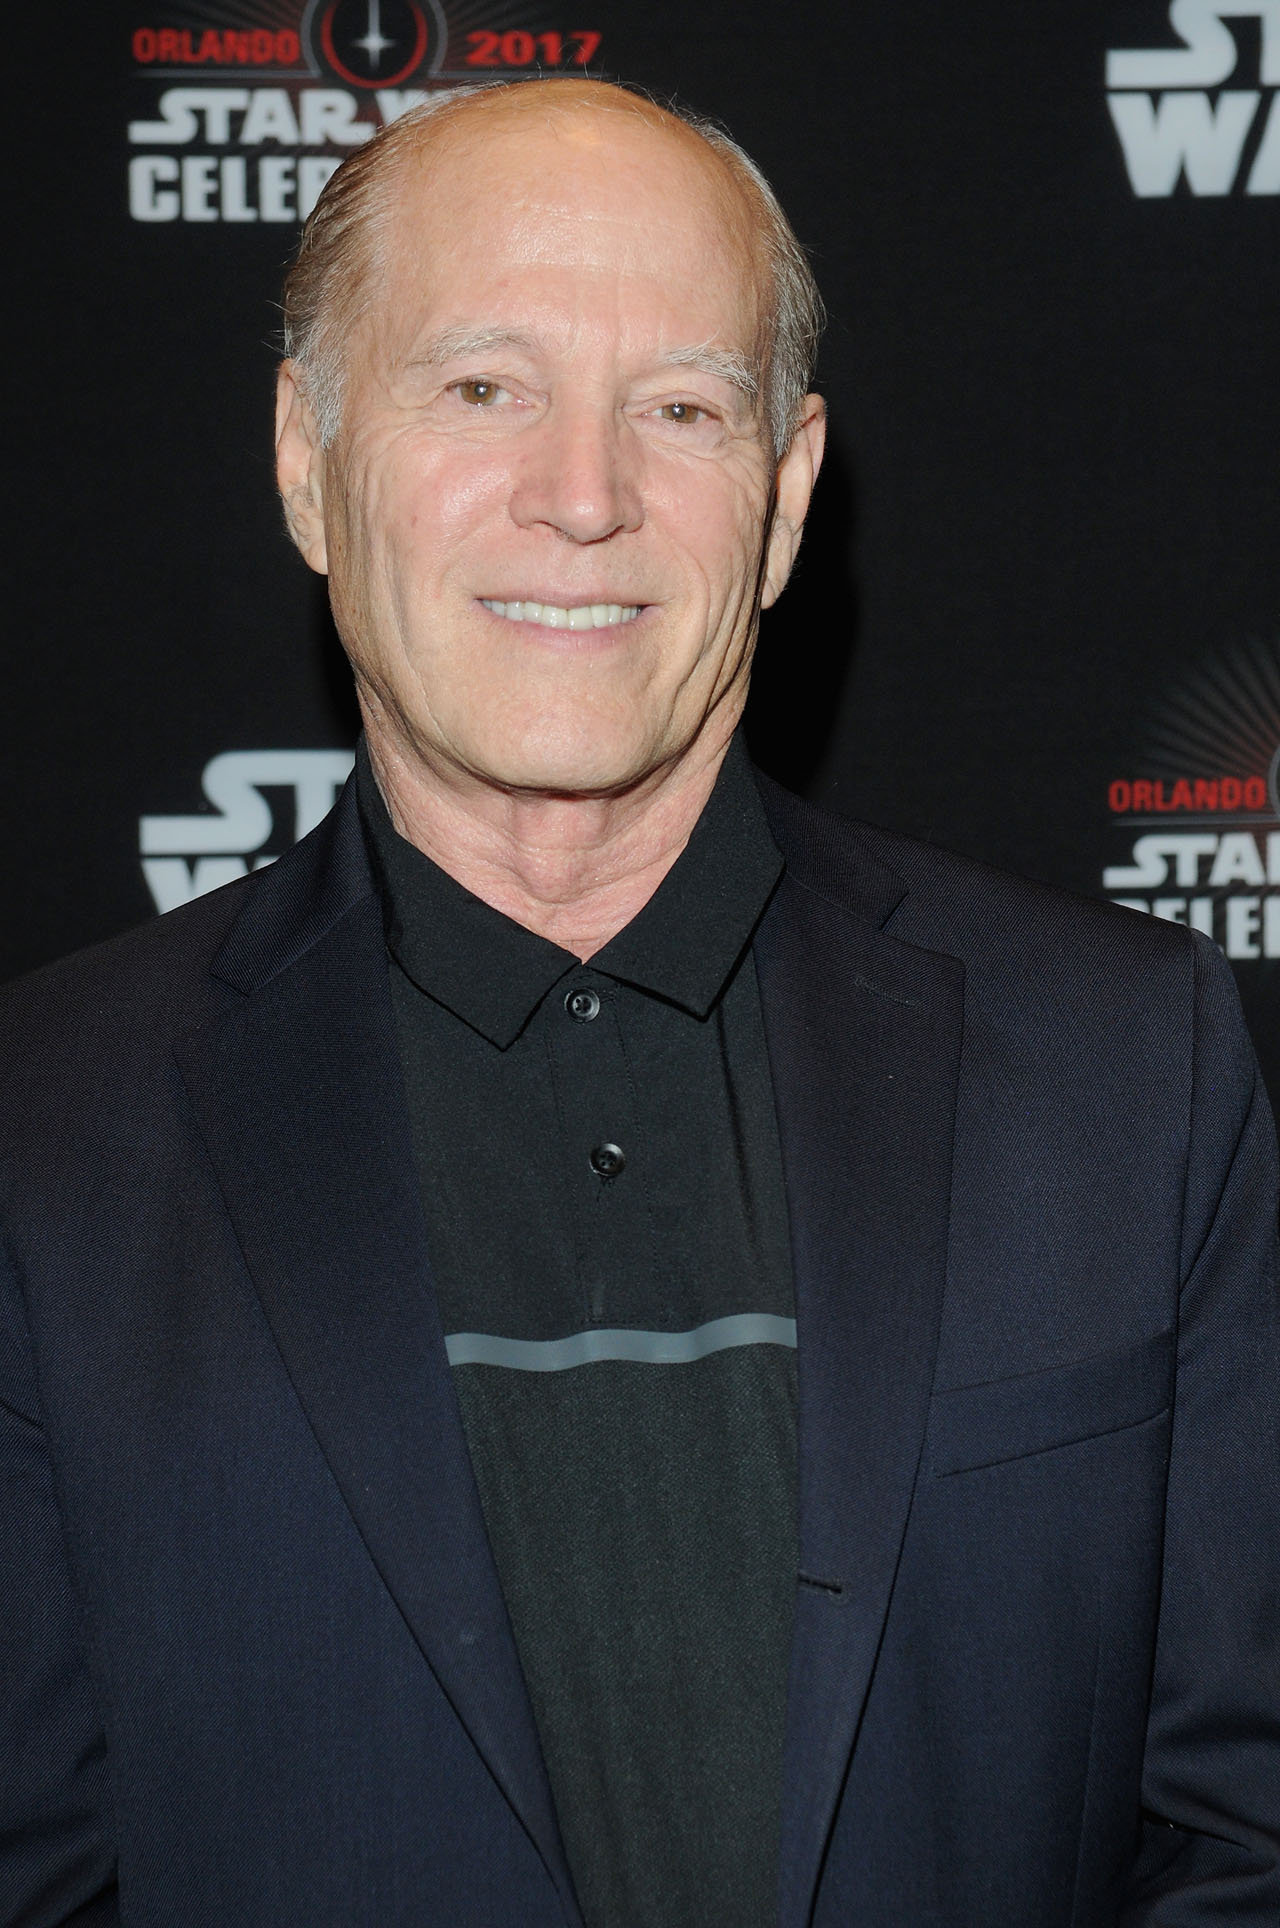 ORLANDO, FL - APRIL 14:  Frank Marshall attends the STAR WARS: THE LAST JEDI PANEL during the 2017 STAR WARS CELEBRATION at Orange County Convention Center on April 14, 2017 in Orlando, Florida.  (Photo by Gerardo Mora/Getty Images for Disney) *** Local Caption *** Frank Marshall